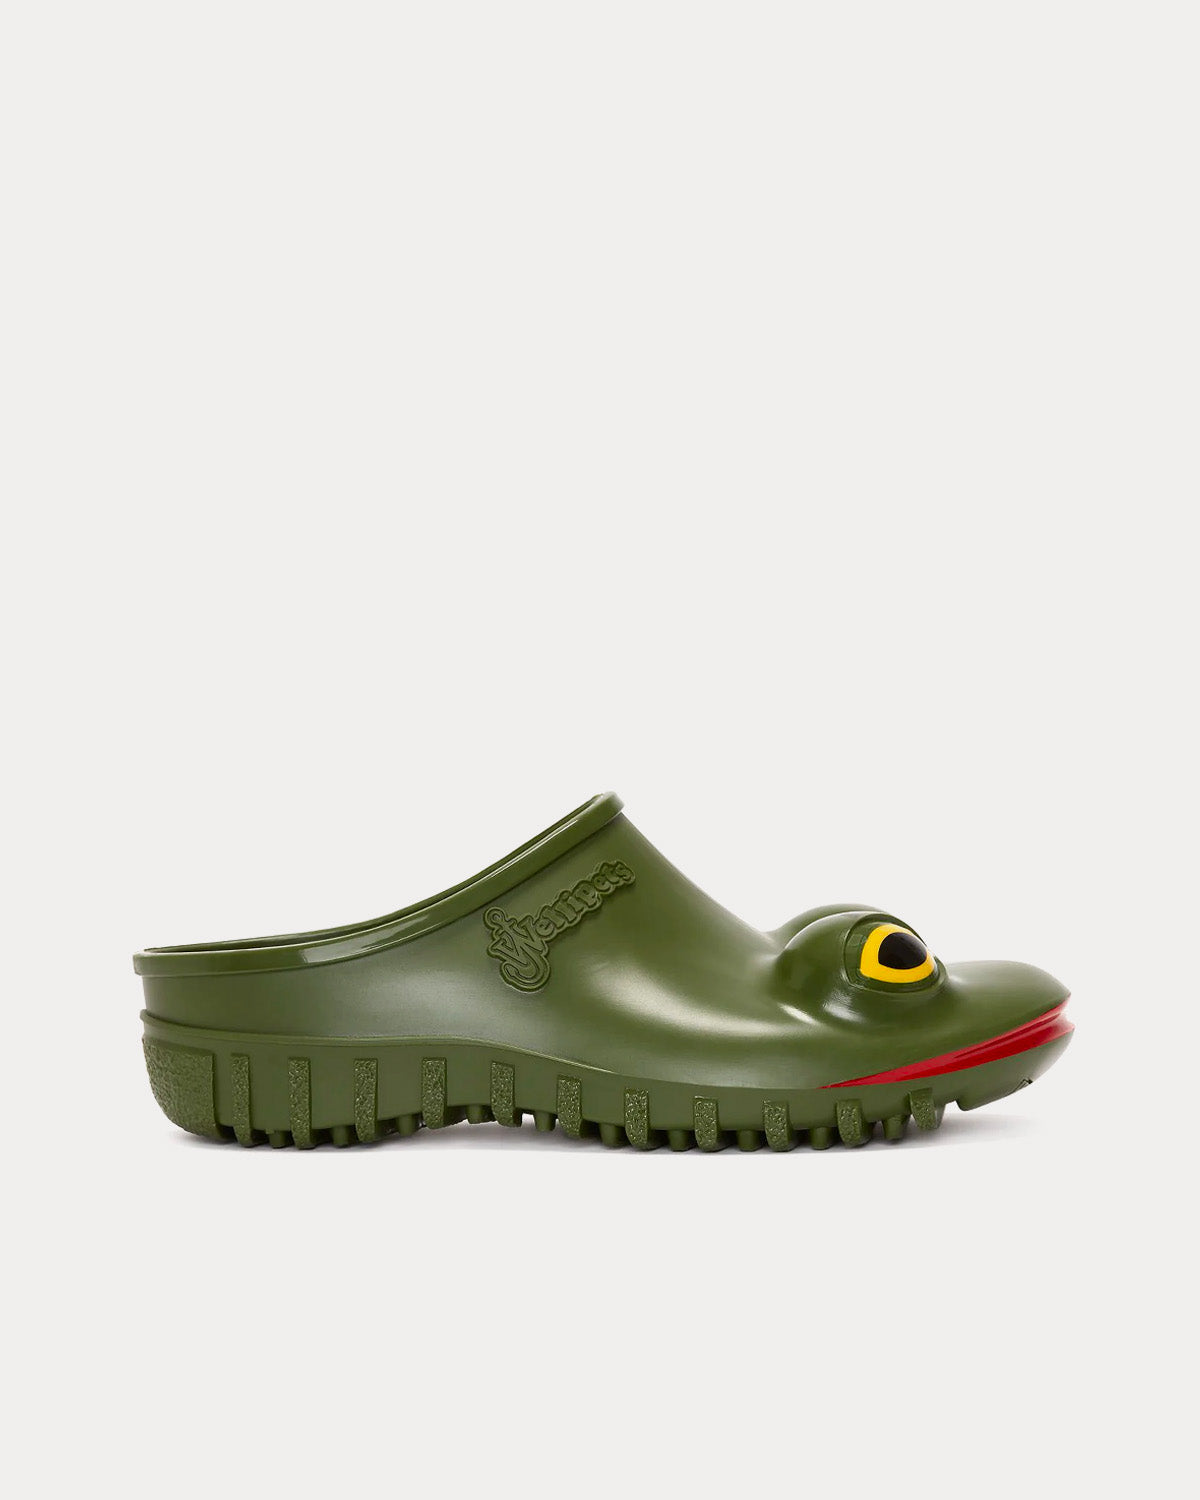 JW Anderson - x Wellipets Frog Loafer Green Slip Ons